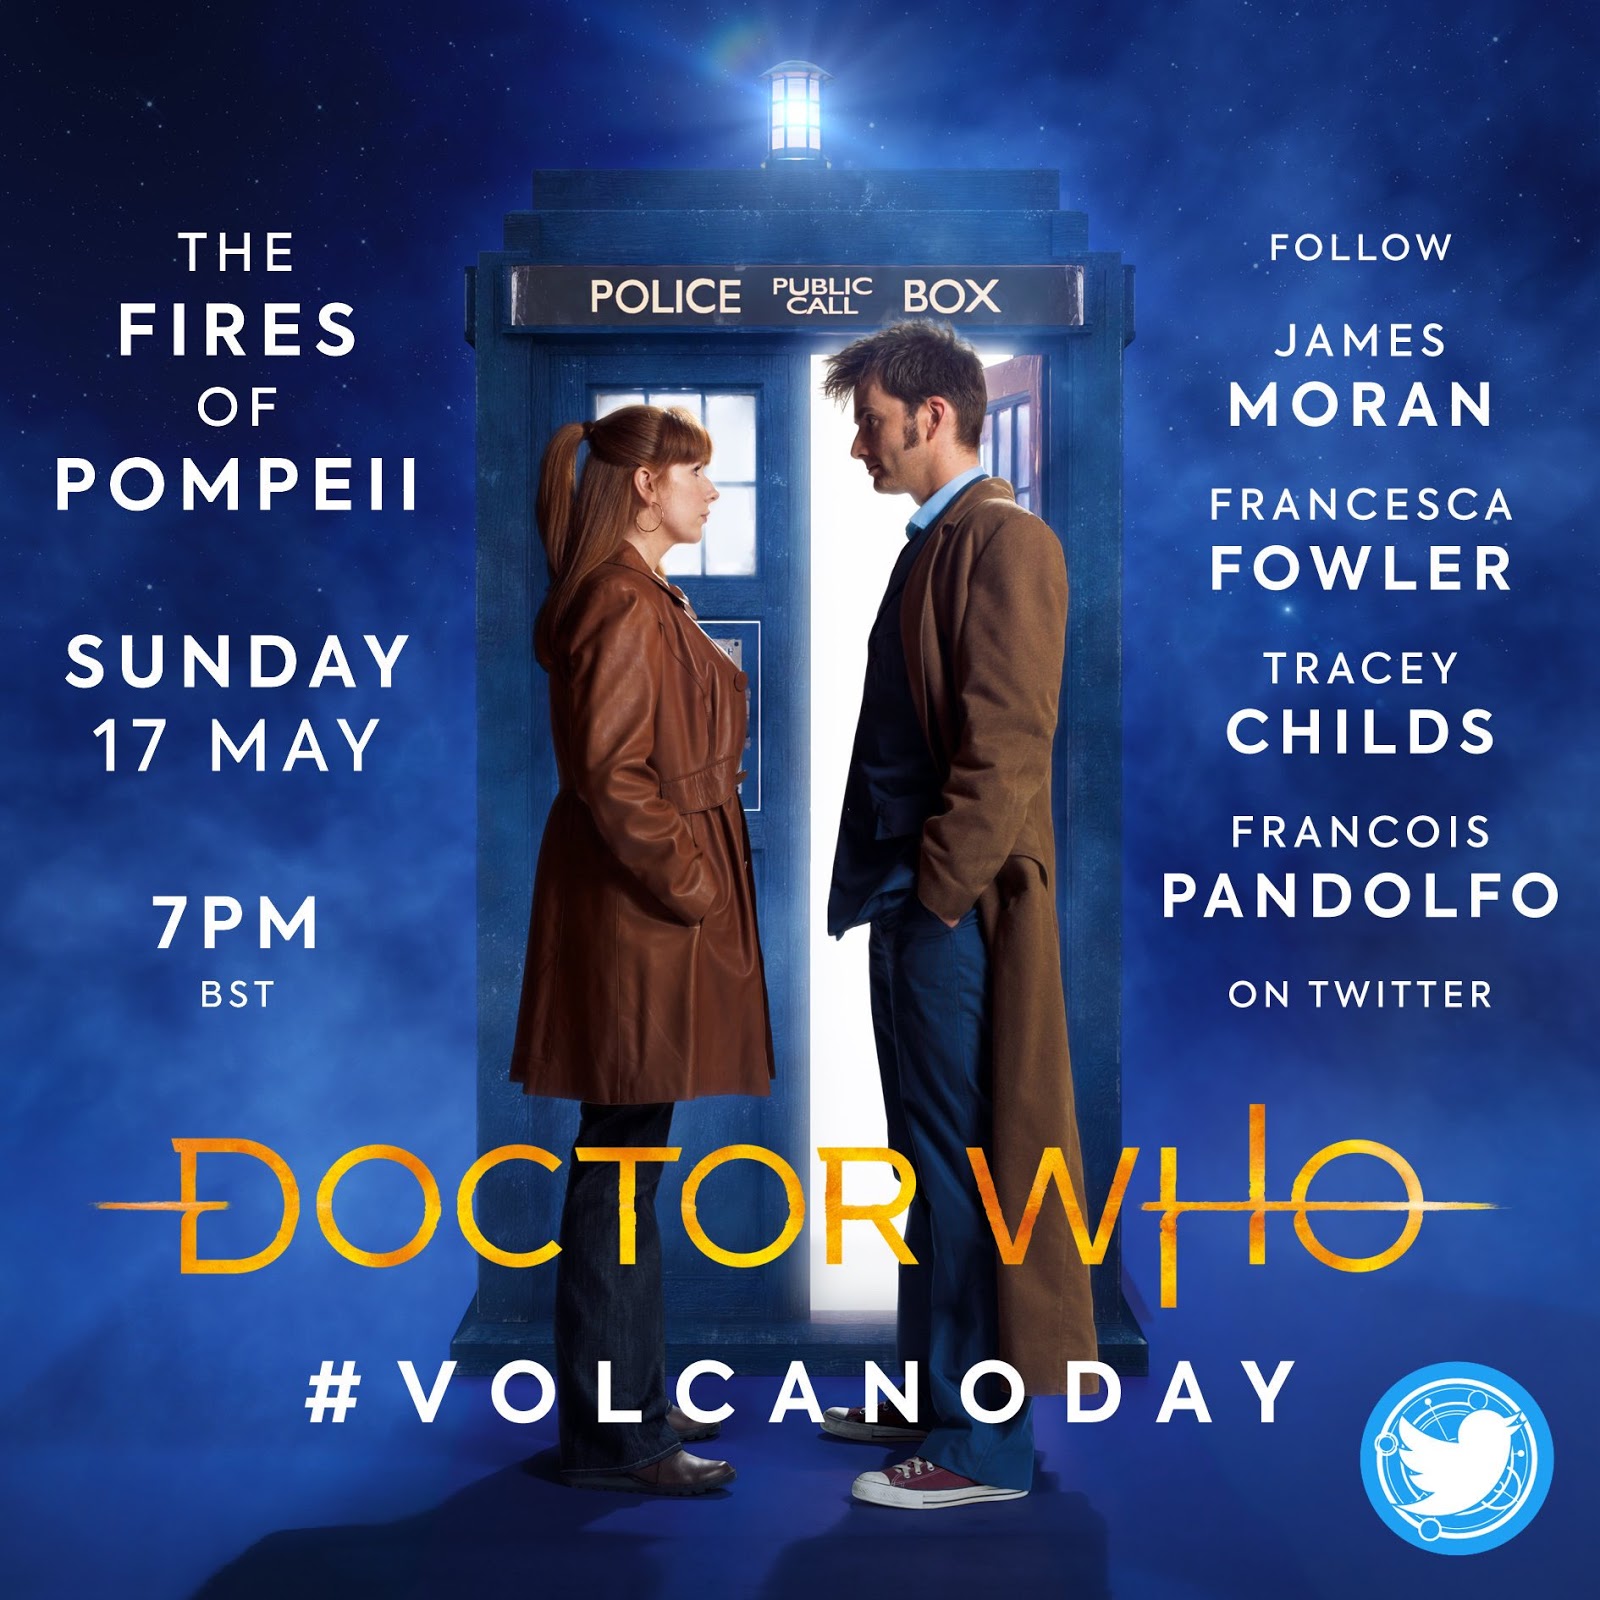 Doctor Who Lockdown Live Tweetalong For The Fires Of Pompeii Tonight